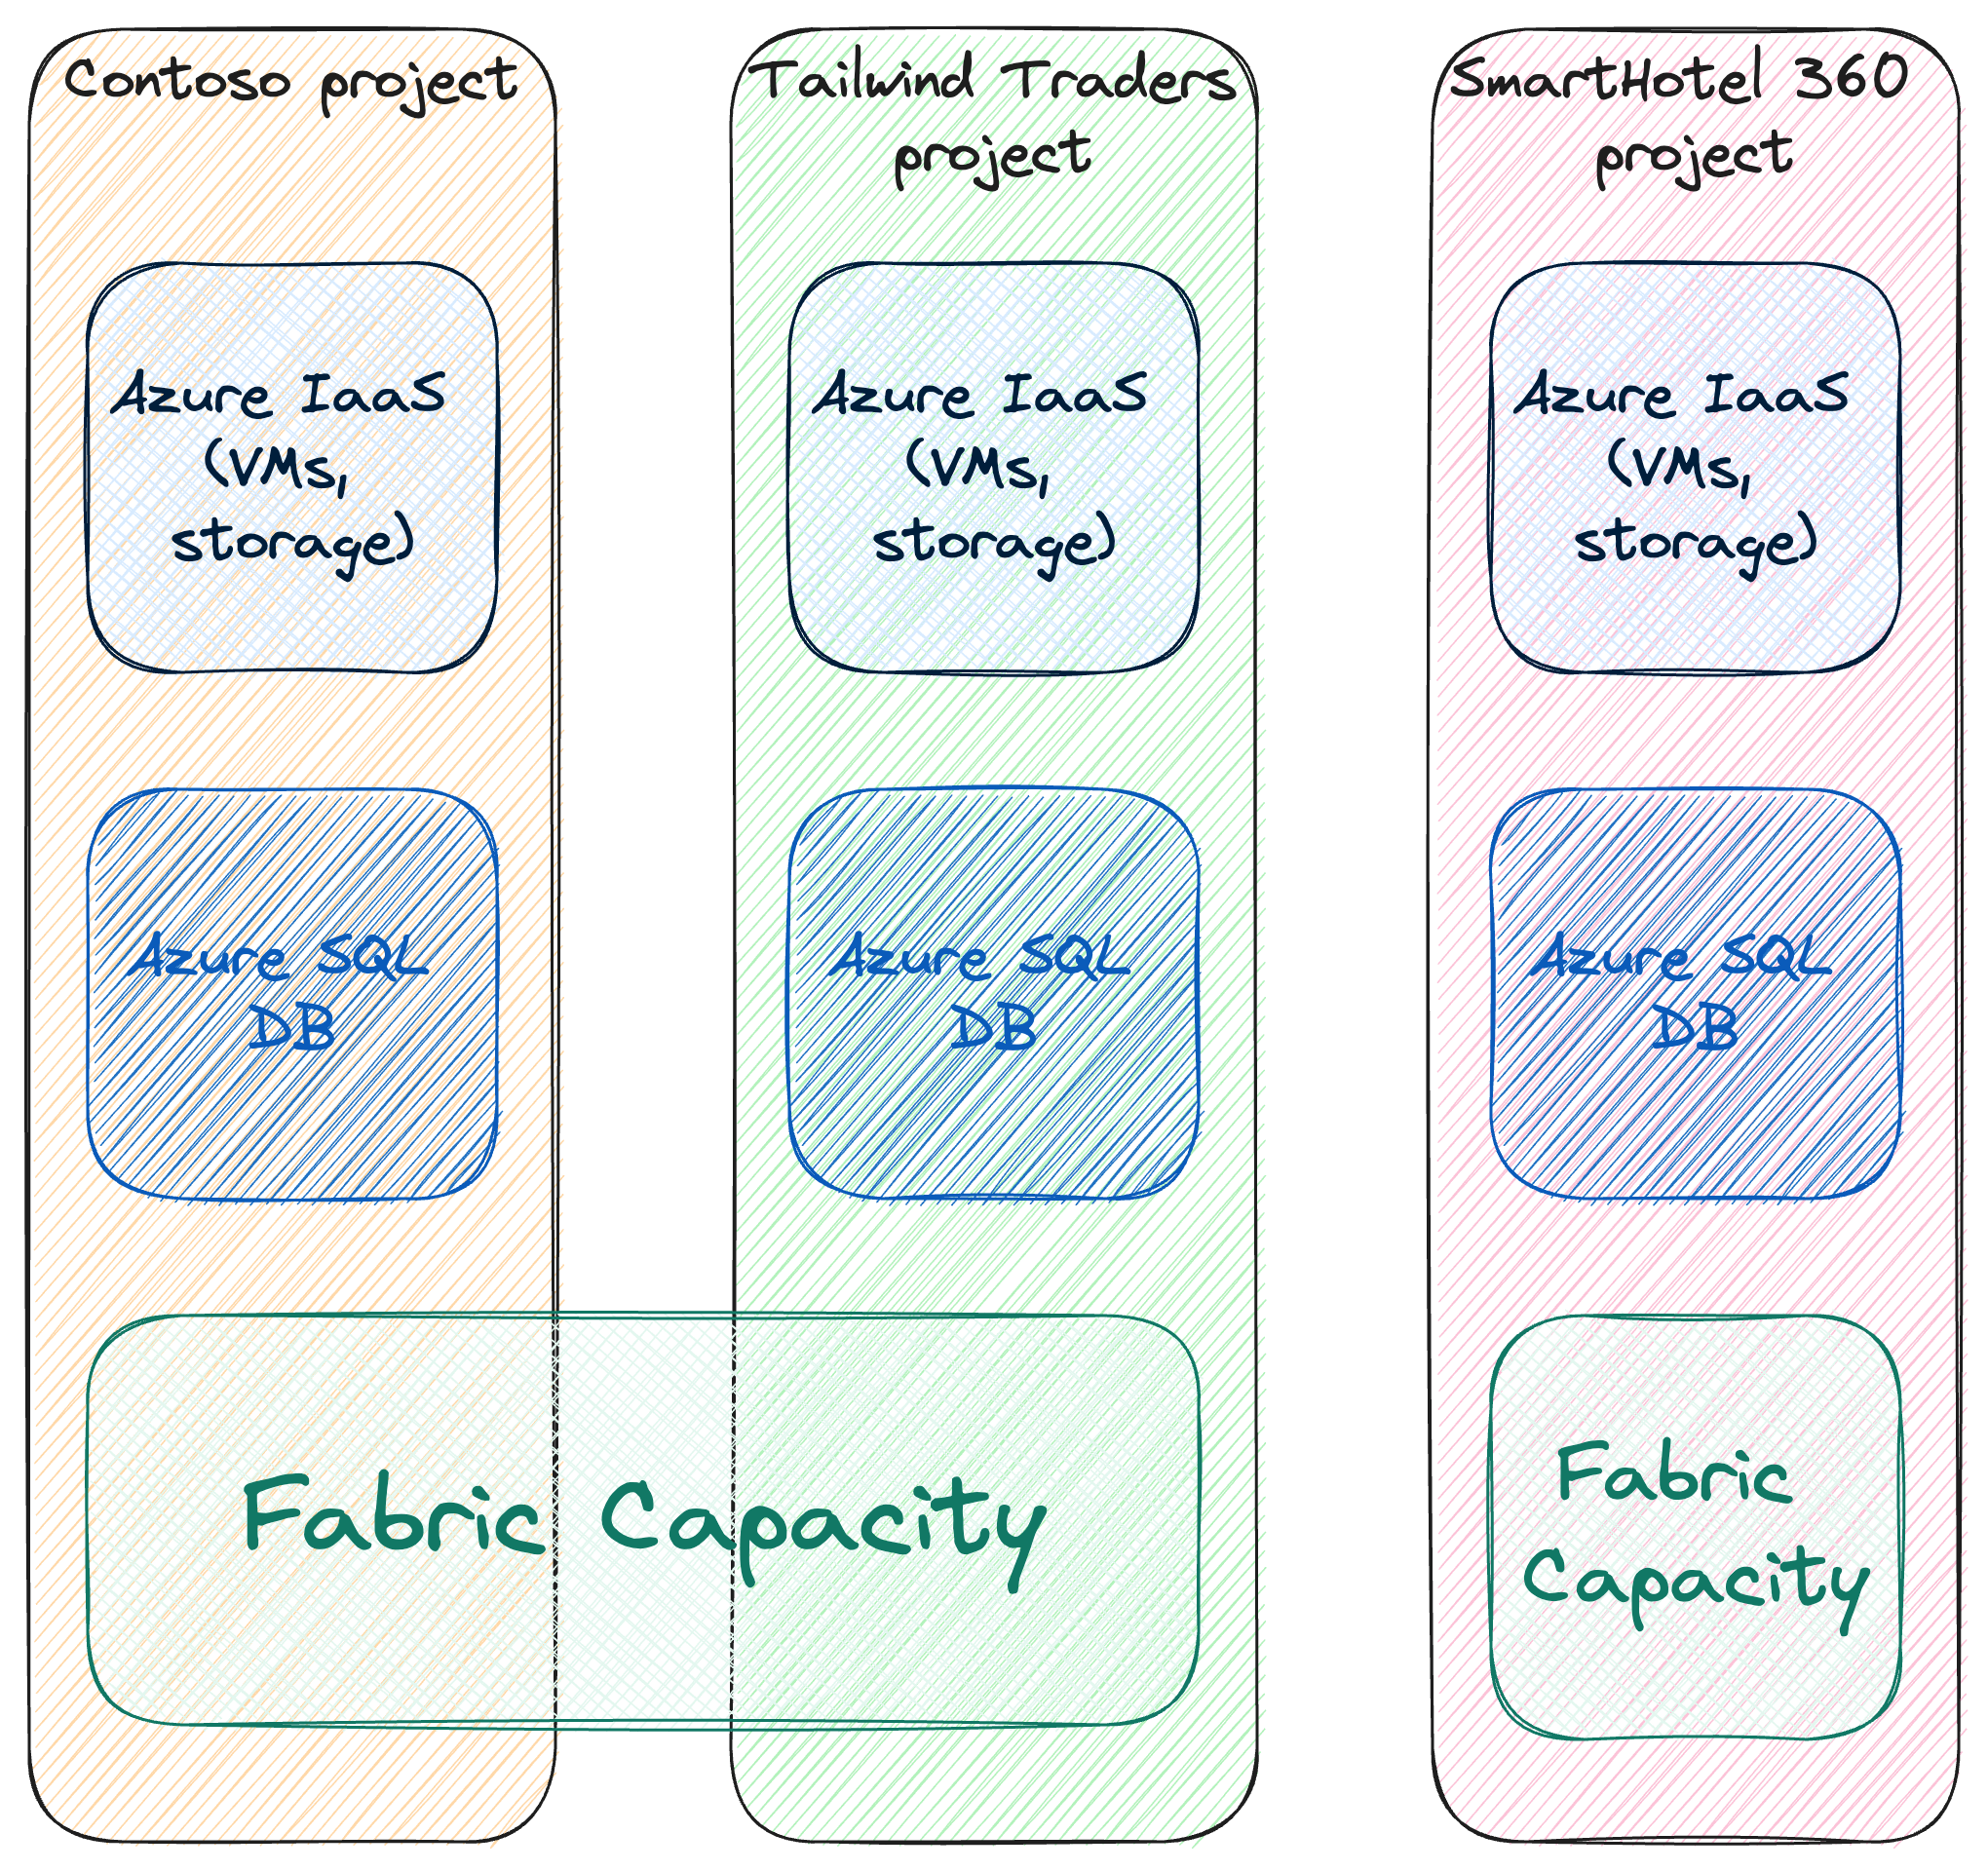 Fabric Capacities can be shared amongst multiple users, projects, and workloads across an organization*